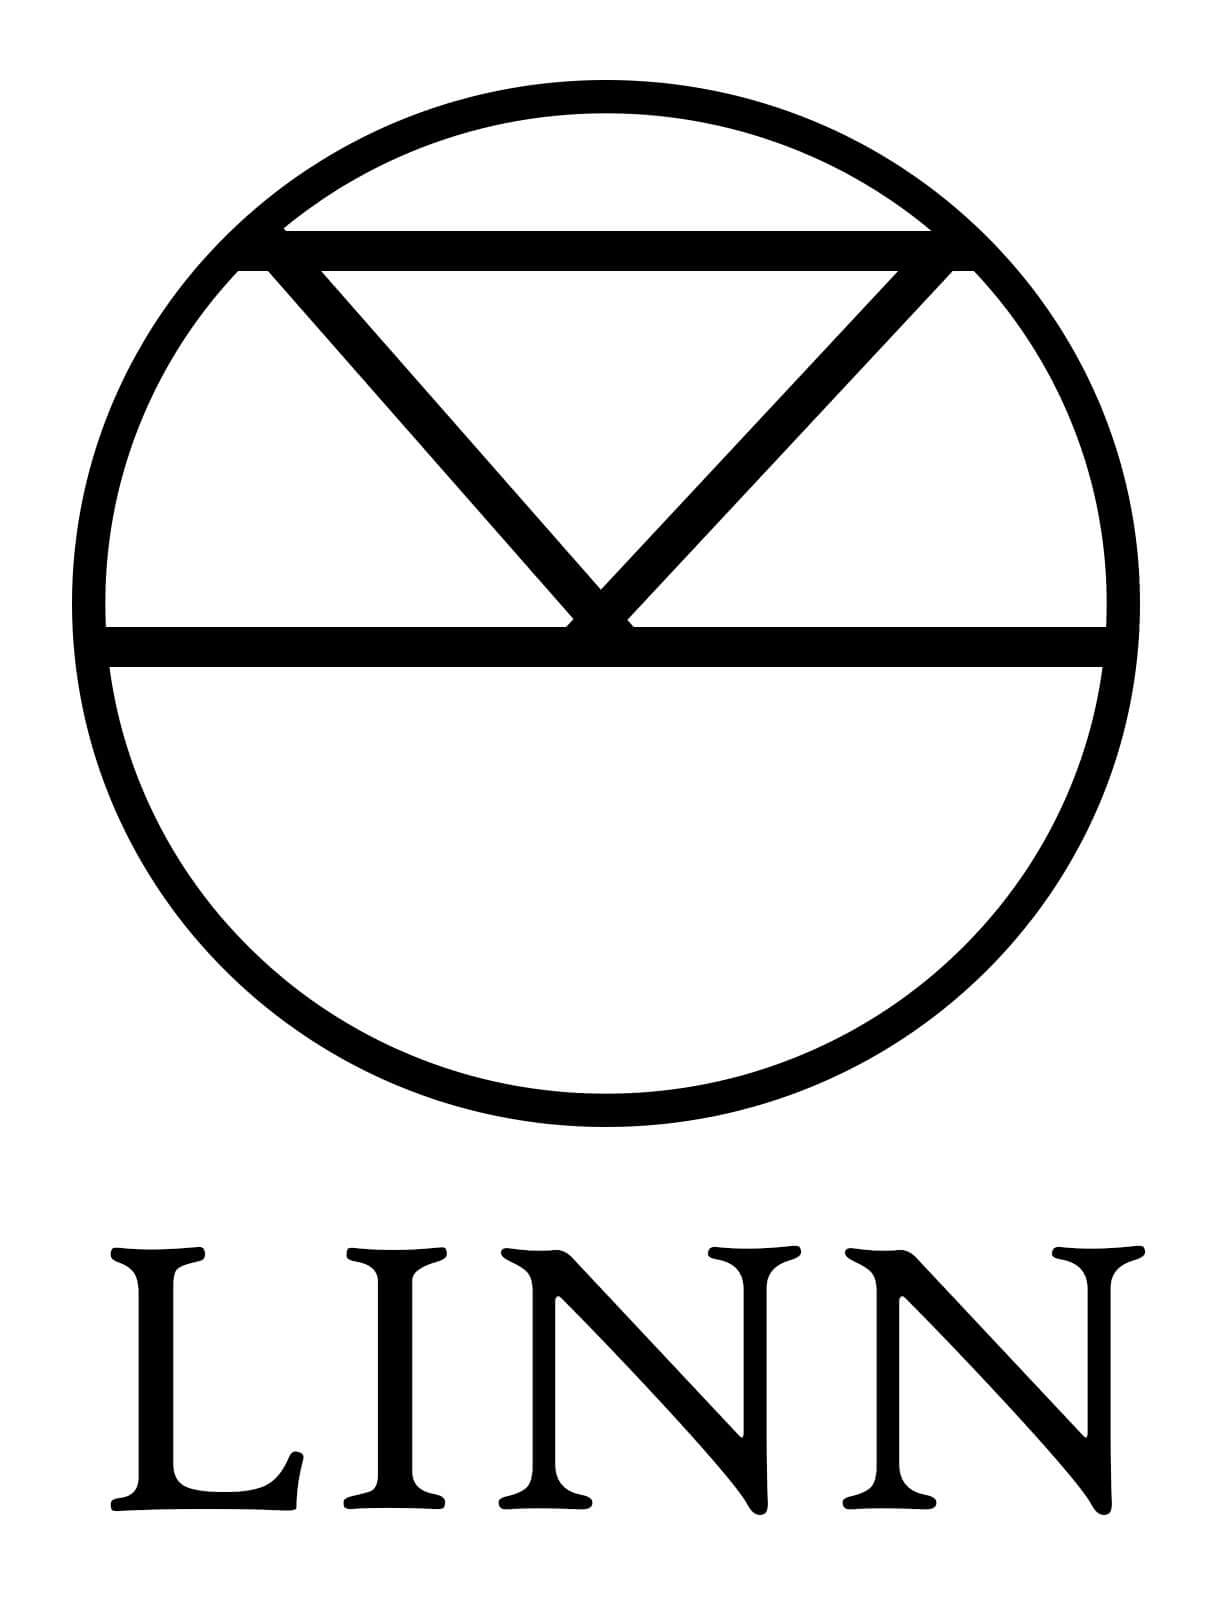 More information about Linn